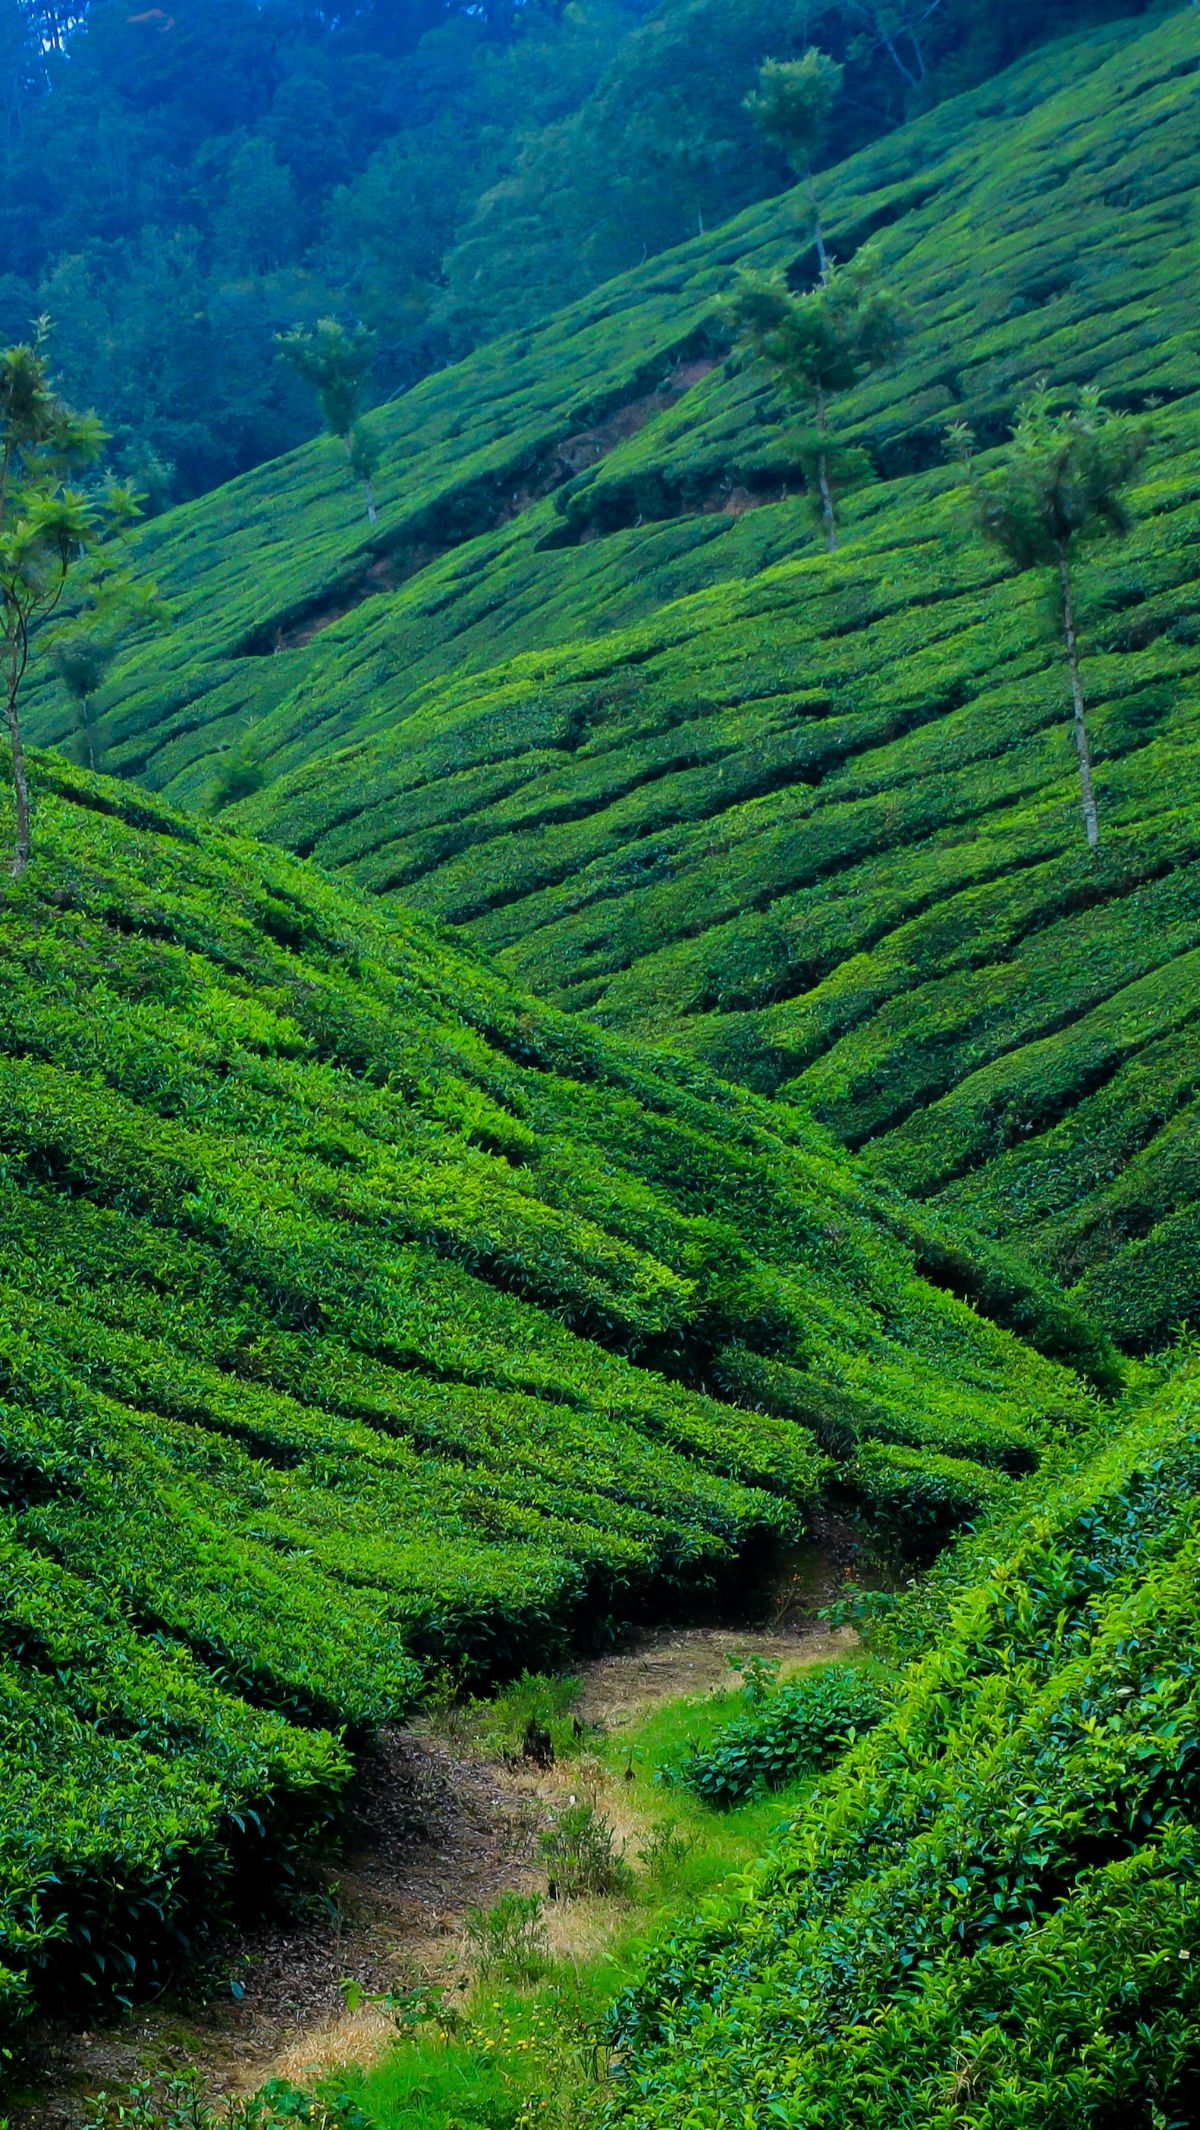 5. Munnar – South India's Tea Heaven

Munnar is a breathtaking hill position. It fills with lush tea gardens, misty mountains, and a cool climate. This site is located in the Western Ghats. Munnar is also known as South India's tea heaven. Munnar's emerald-green tea plantations create a dreamlike landscape that delights visitors.

pexels-nandhu-kumar